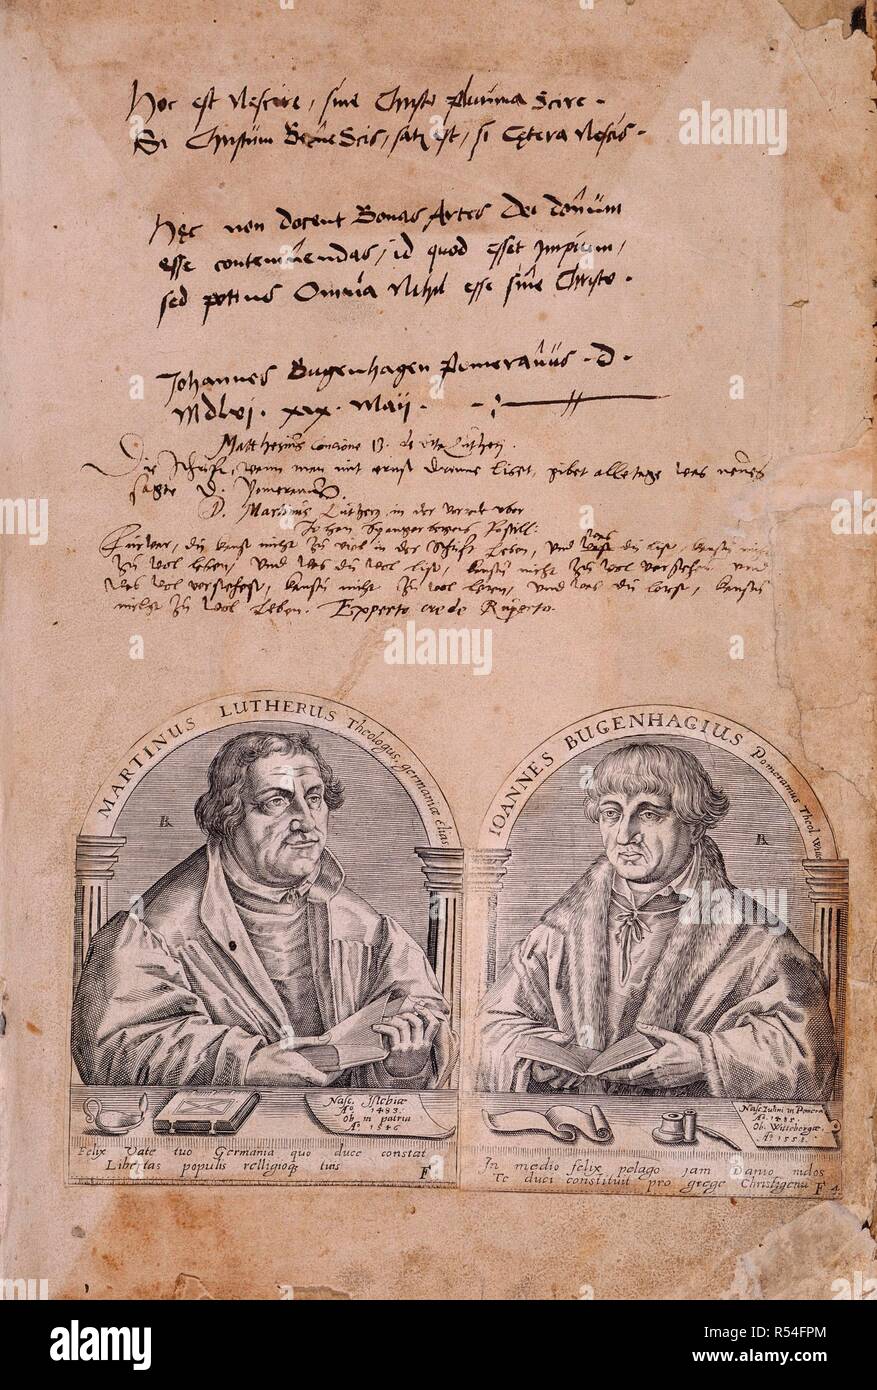 Martin Luther and J. Bugenhagius. Biblia, das ist, die gantze Heilige Schrift: Deuds. H. Lufft: Wittemberg, 1541. Martin Luther (1483-1546). German religious reformer and founder of the Reformation. John/Joannes Bugenhagius/Bugenhagen, Pomeranus, the Doctor of Pomerania, (1485-1558); Pastor of Wittenberg, associate Professor of theology, specialist for the protestant church reorganization (Brunshwig, Denmark etc.); General superintendant of Saxe, father confessor of Luther.  Image taken from Biblia, das ist, die gantze Heilige Schrift: Deudsch auffs new zugericht. D. Mart. Luth., etc. [With wo Stock Photo